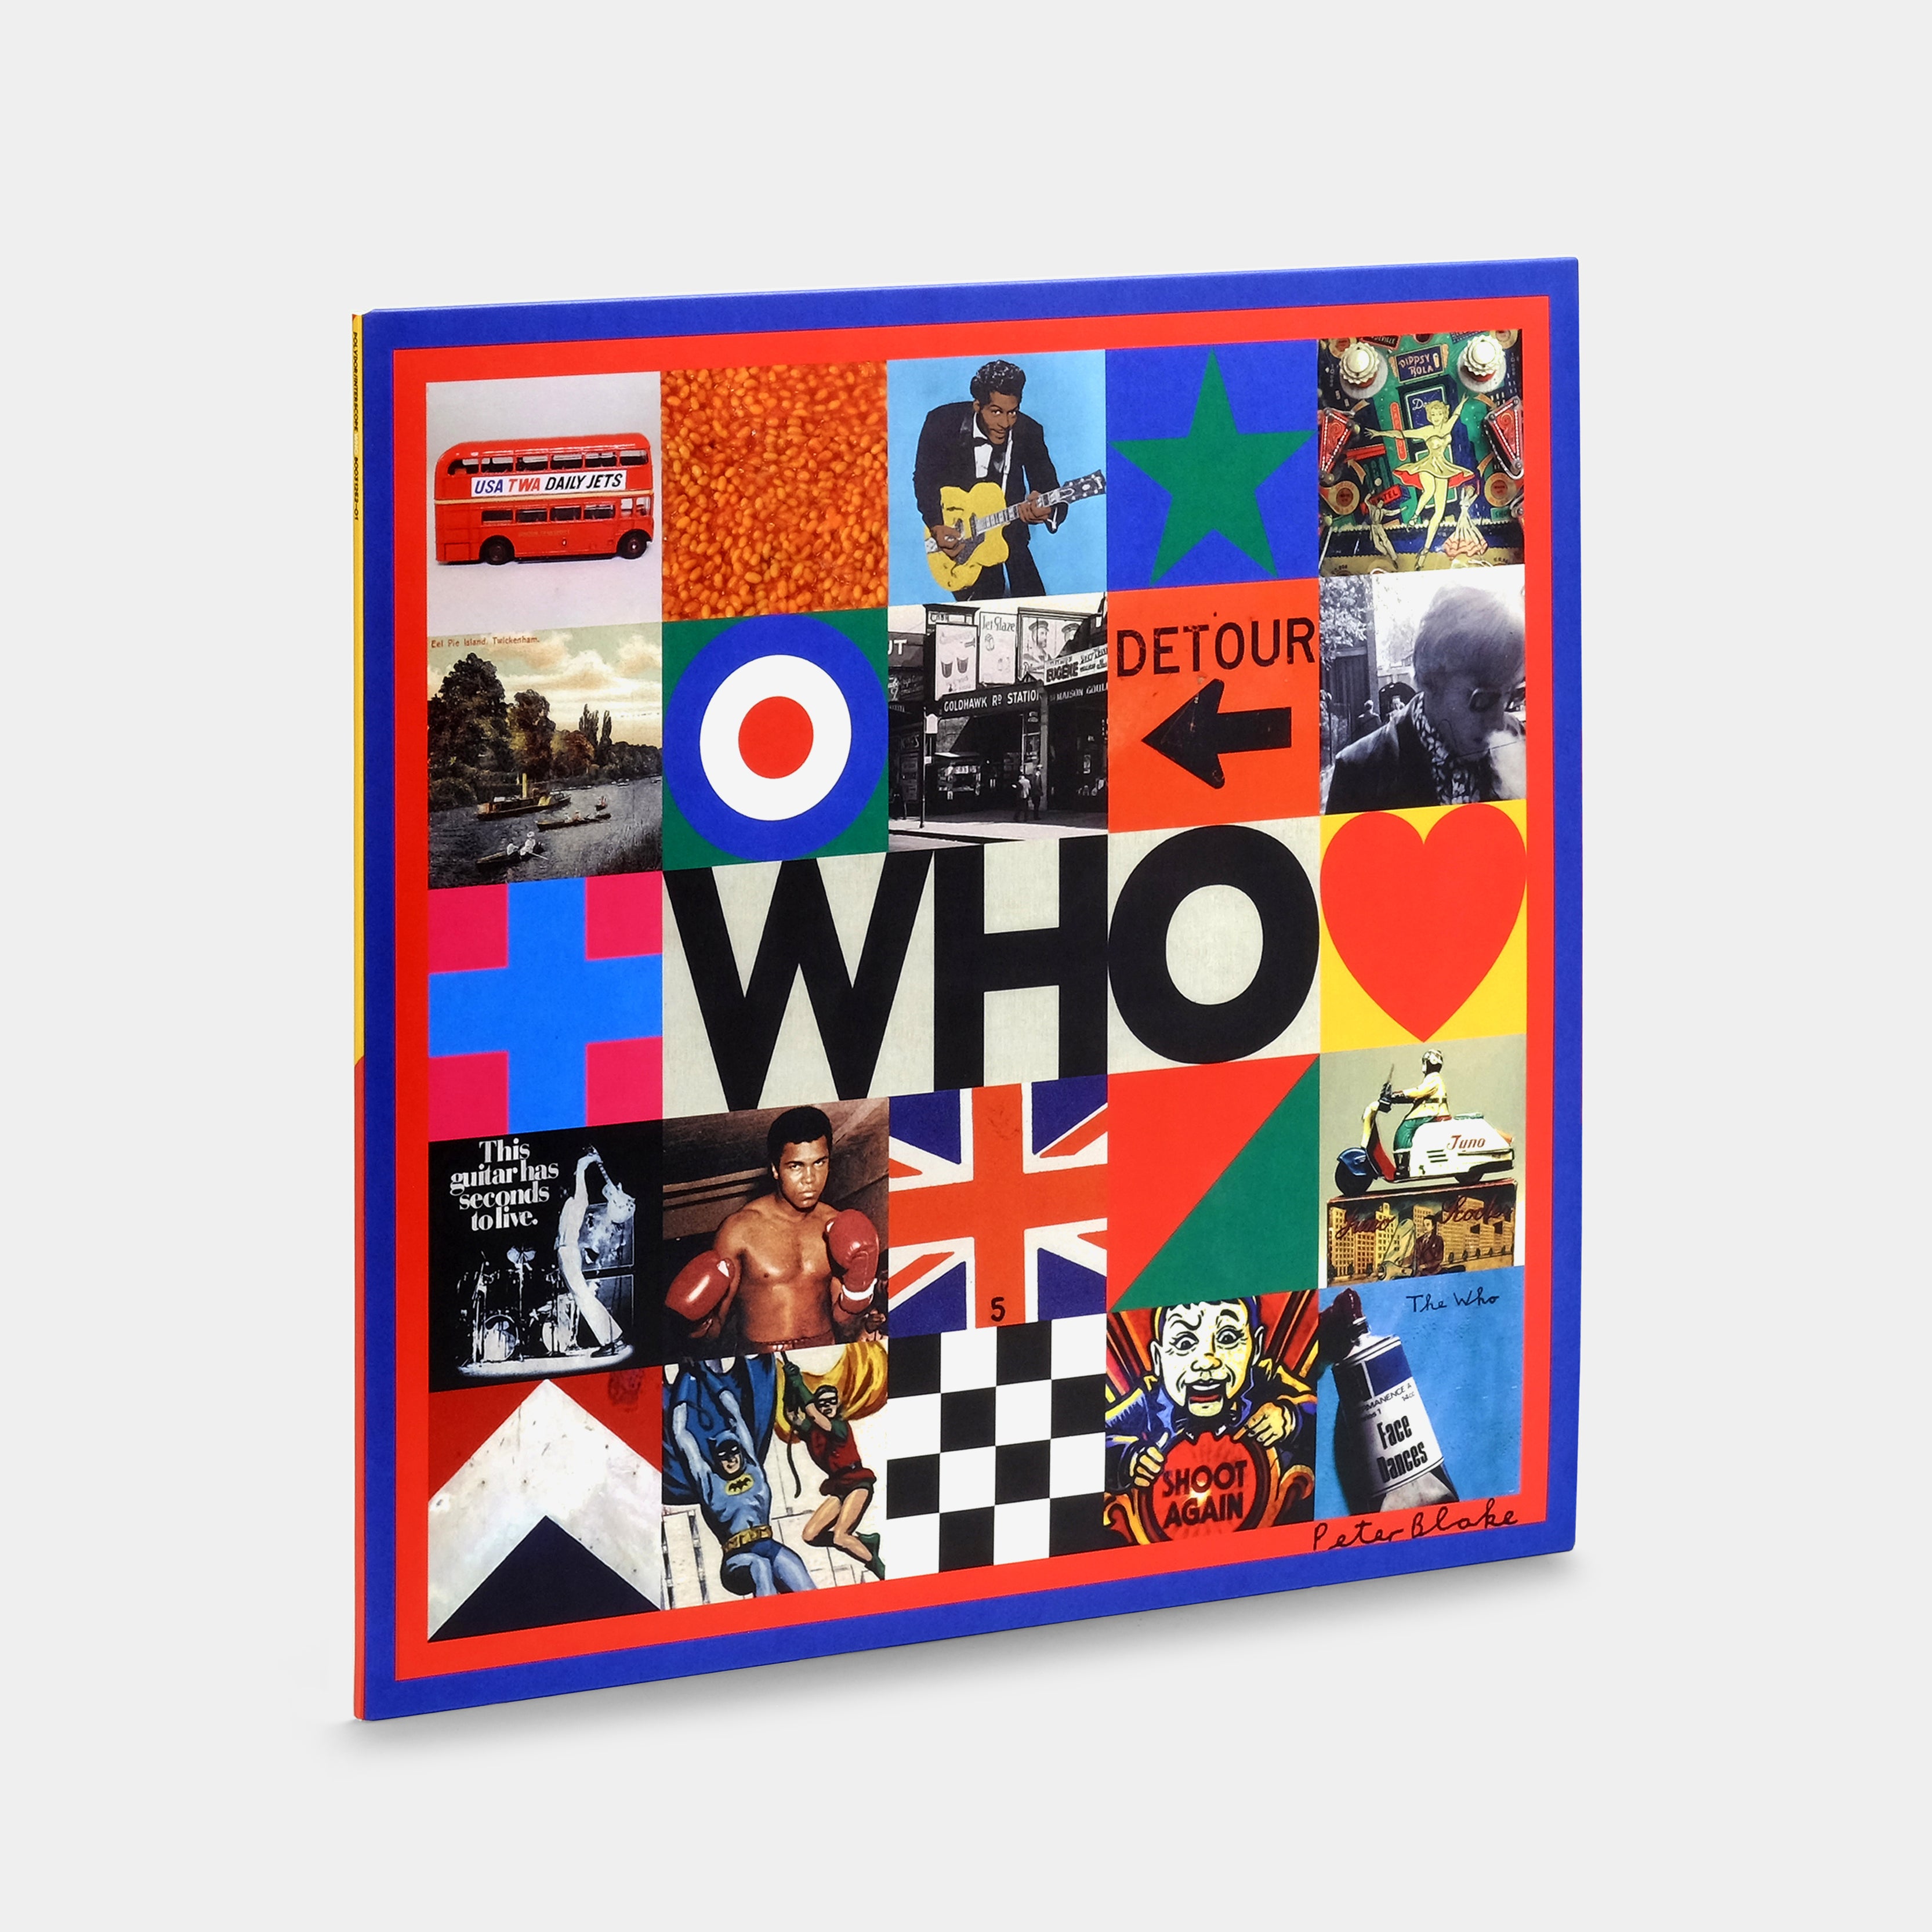 The Who - Who LP Vinyl Record